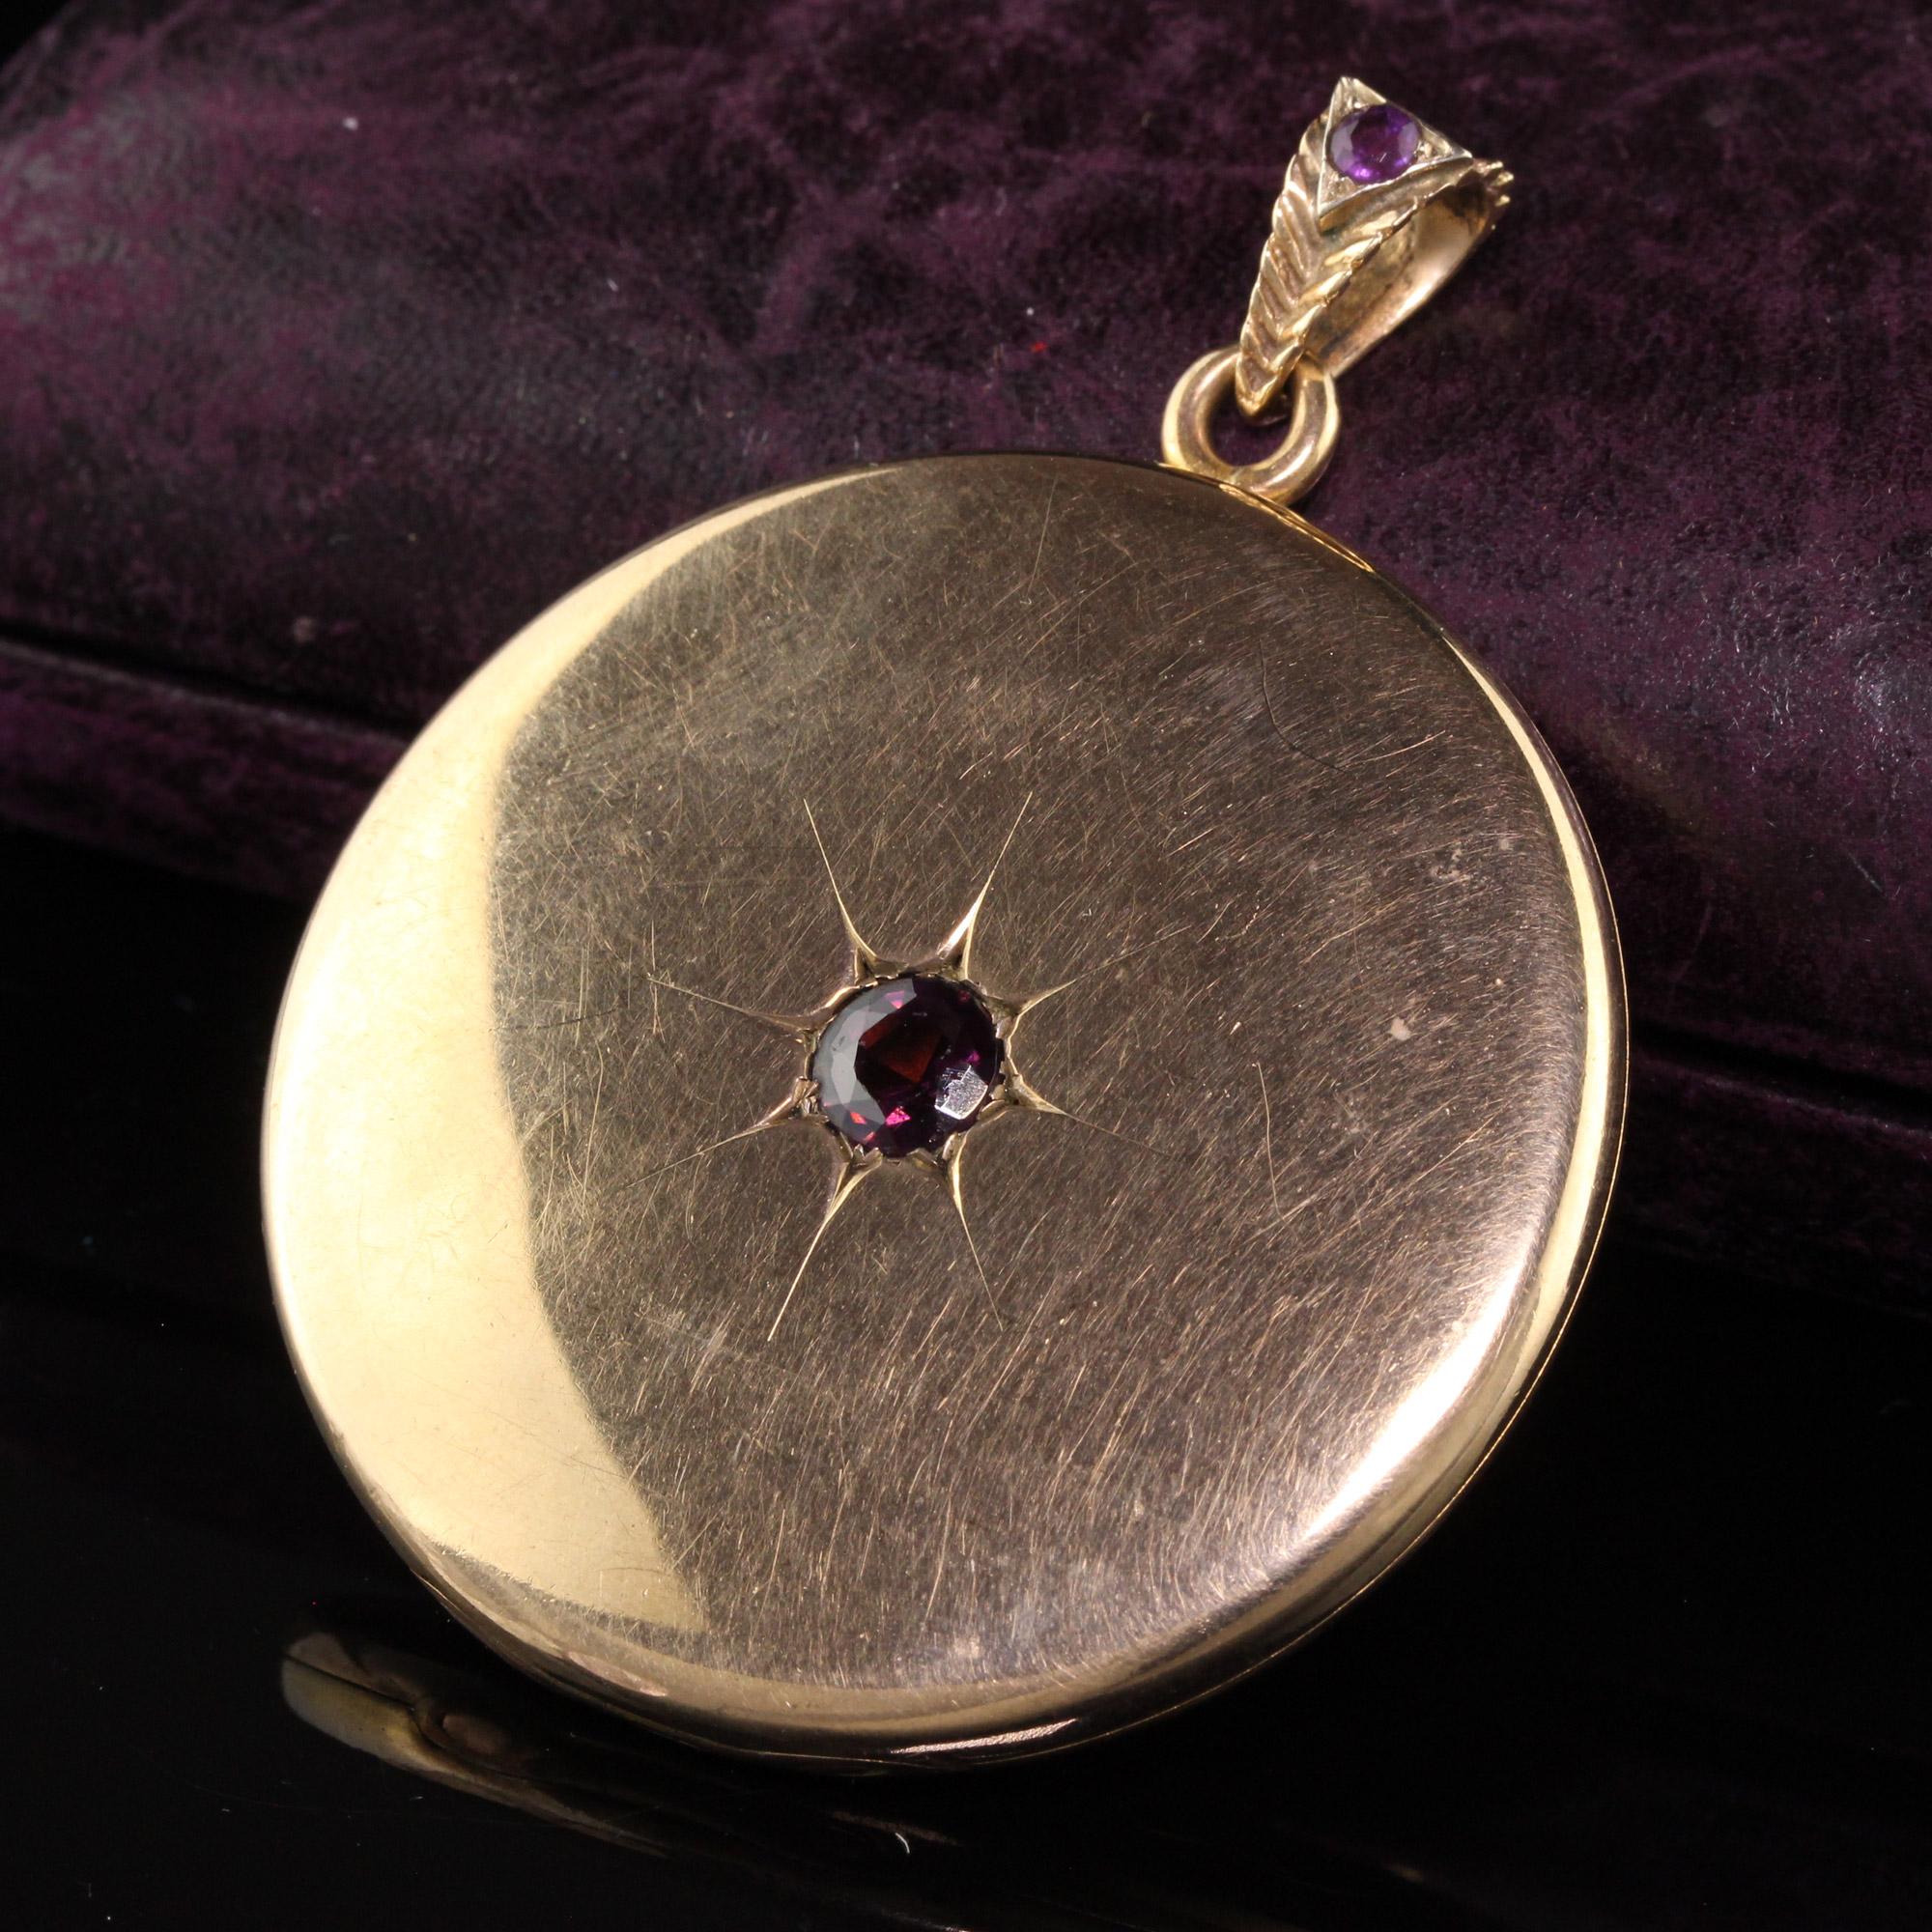 Beautiful Antique Victorian 10K Yellow Gold Amethyst Monogrammed Locket. This large oversized Victorian locket is in great condition and has an amethyst in the center and on the bale of the locket.

Item #N0072

Metal: 10K Yellow Gold

Weight: 18.10